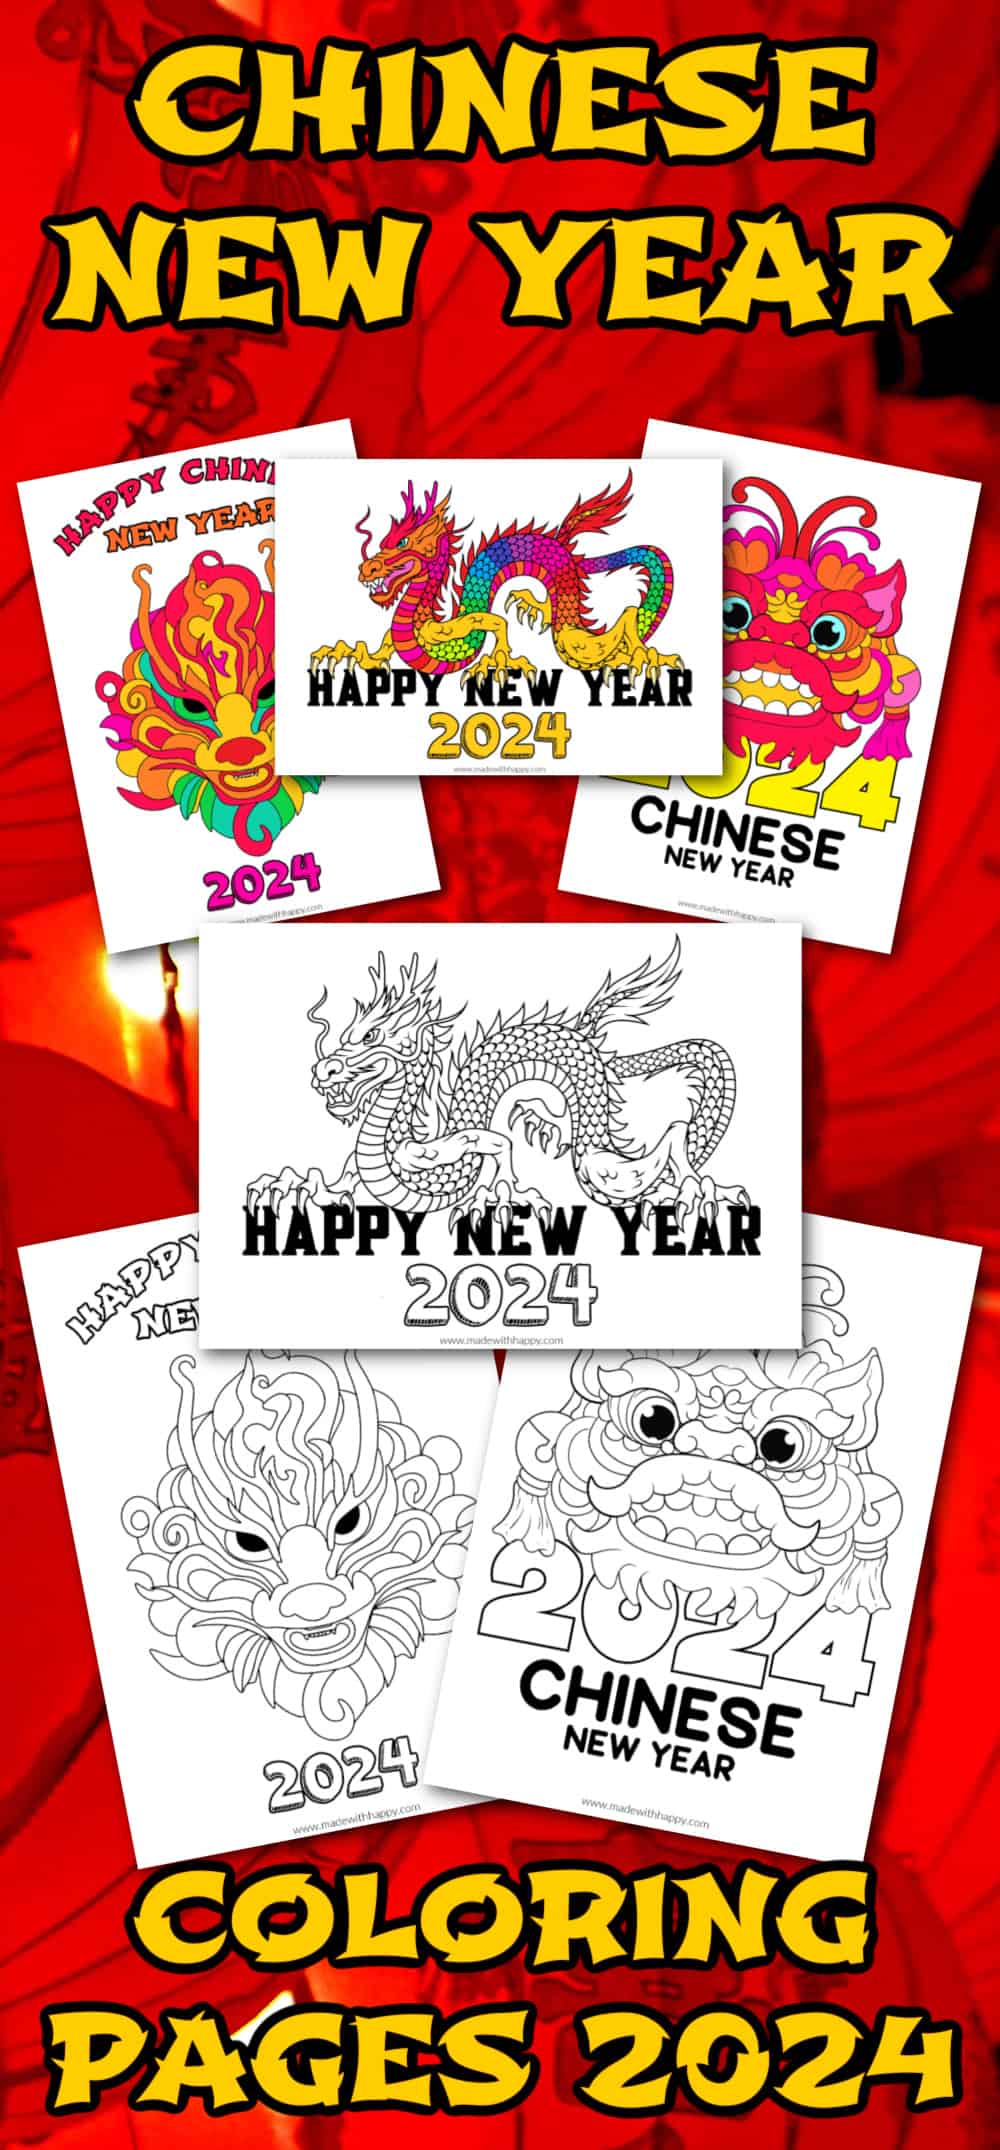 Chinese New Year 2024 Coloring Pages